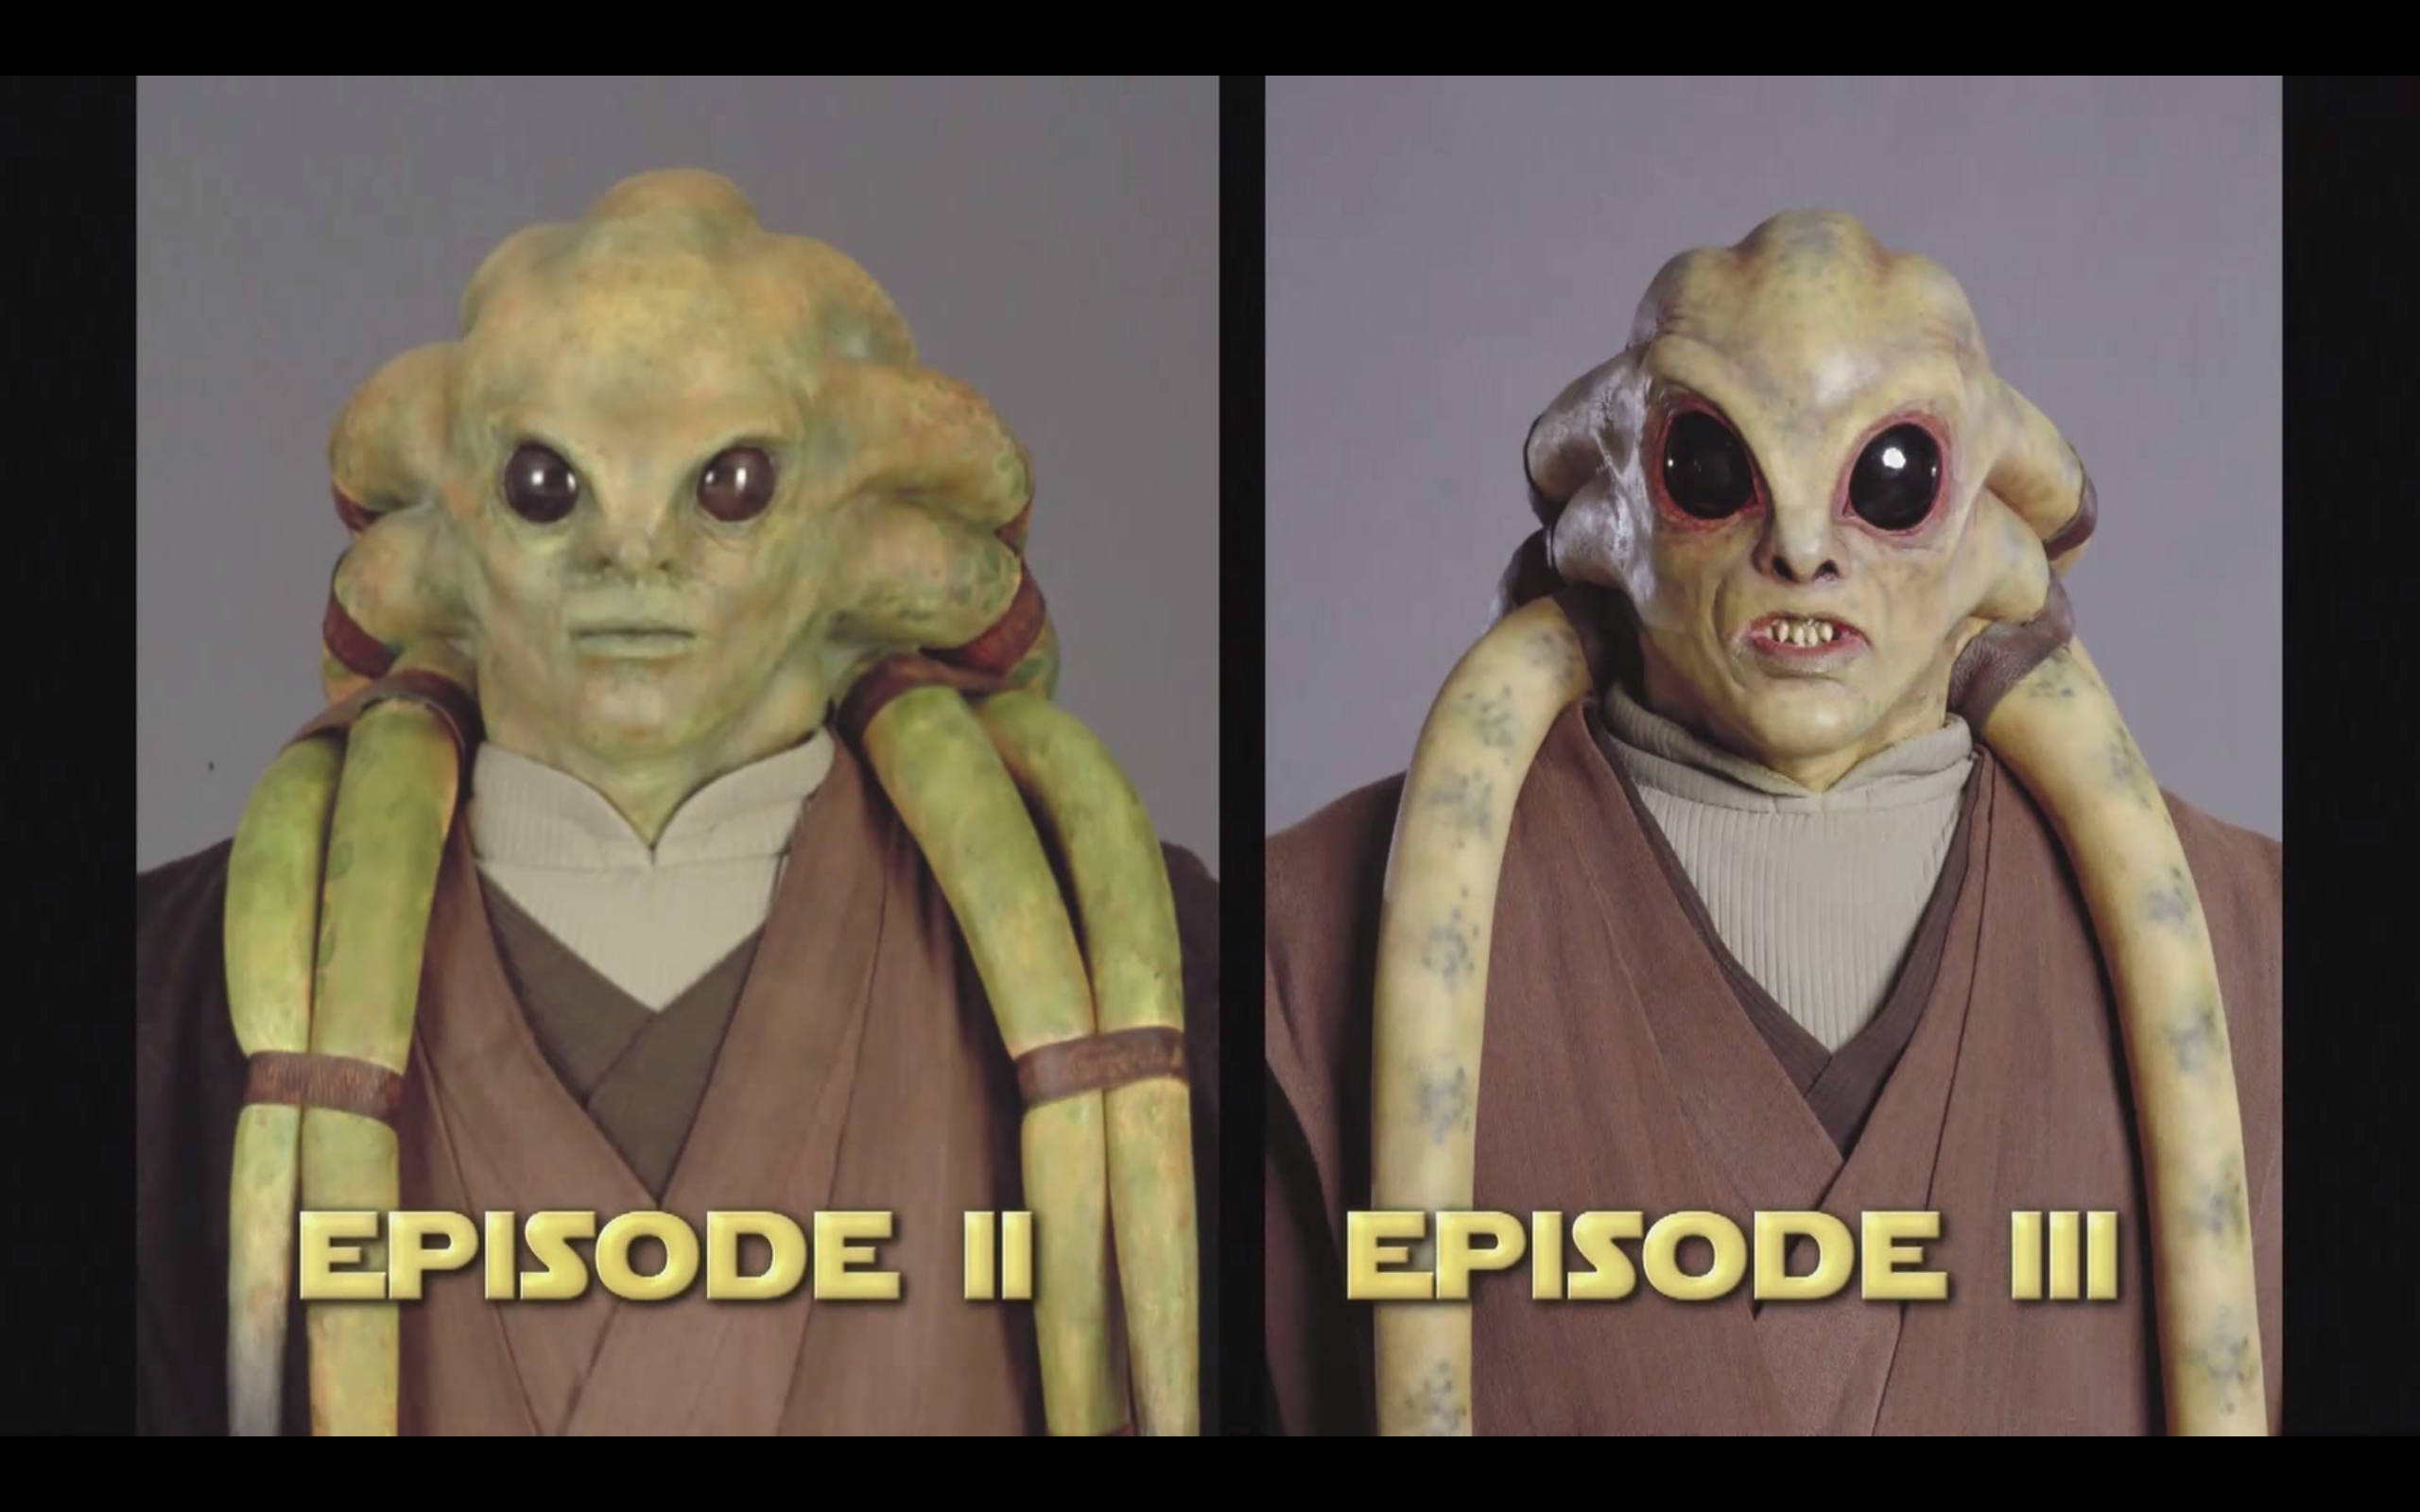 What the hell happened to Kit Fisto between movies? He looked so much friendlier